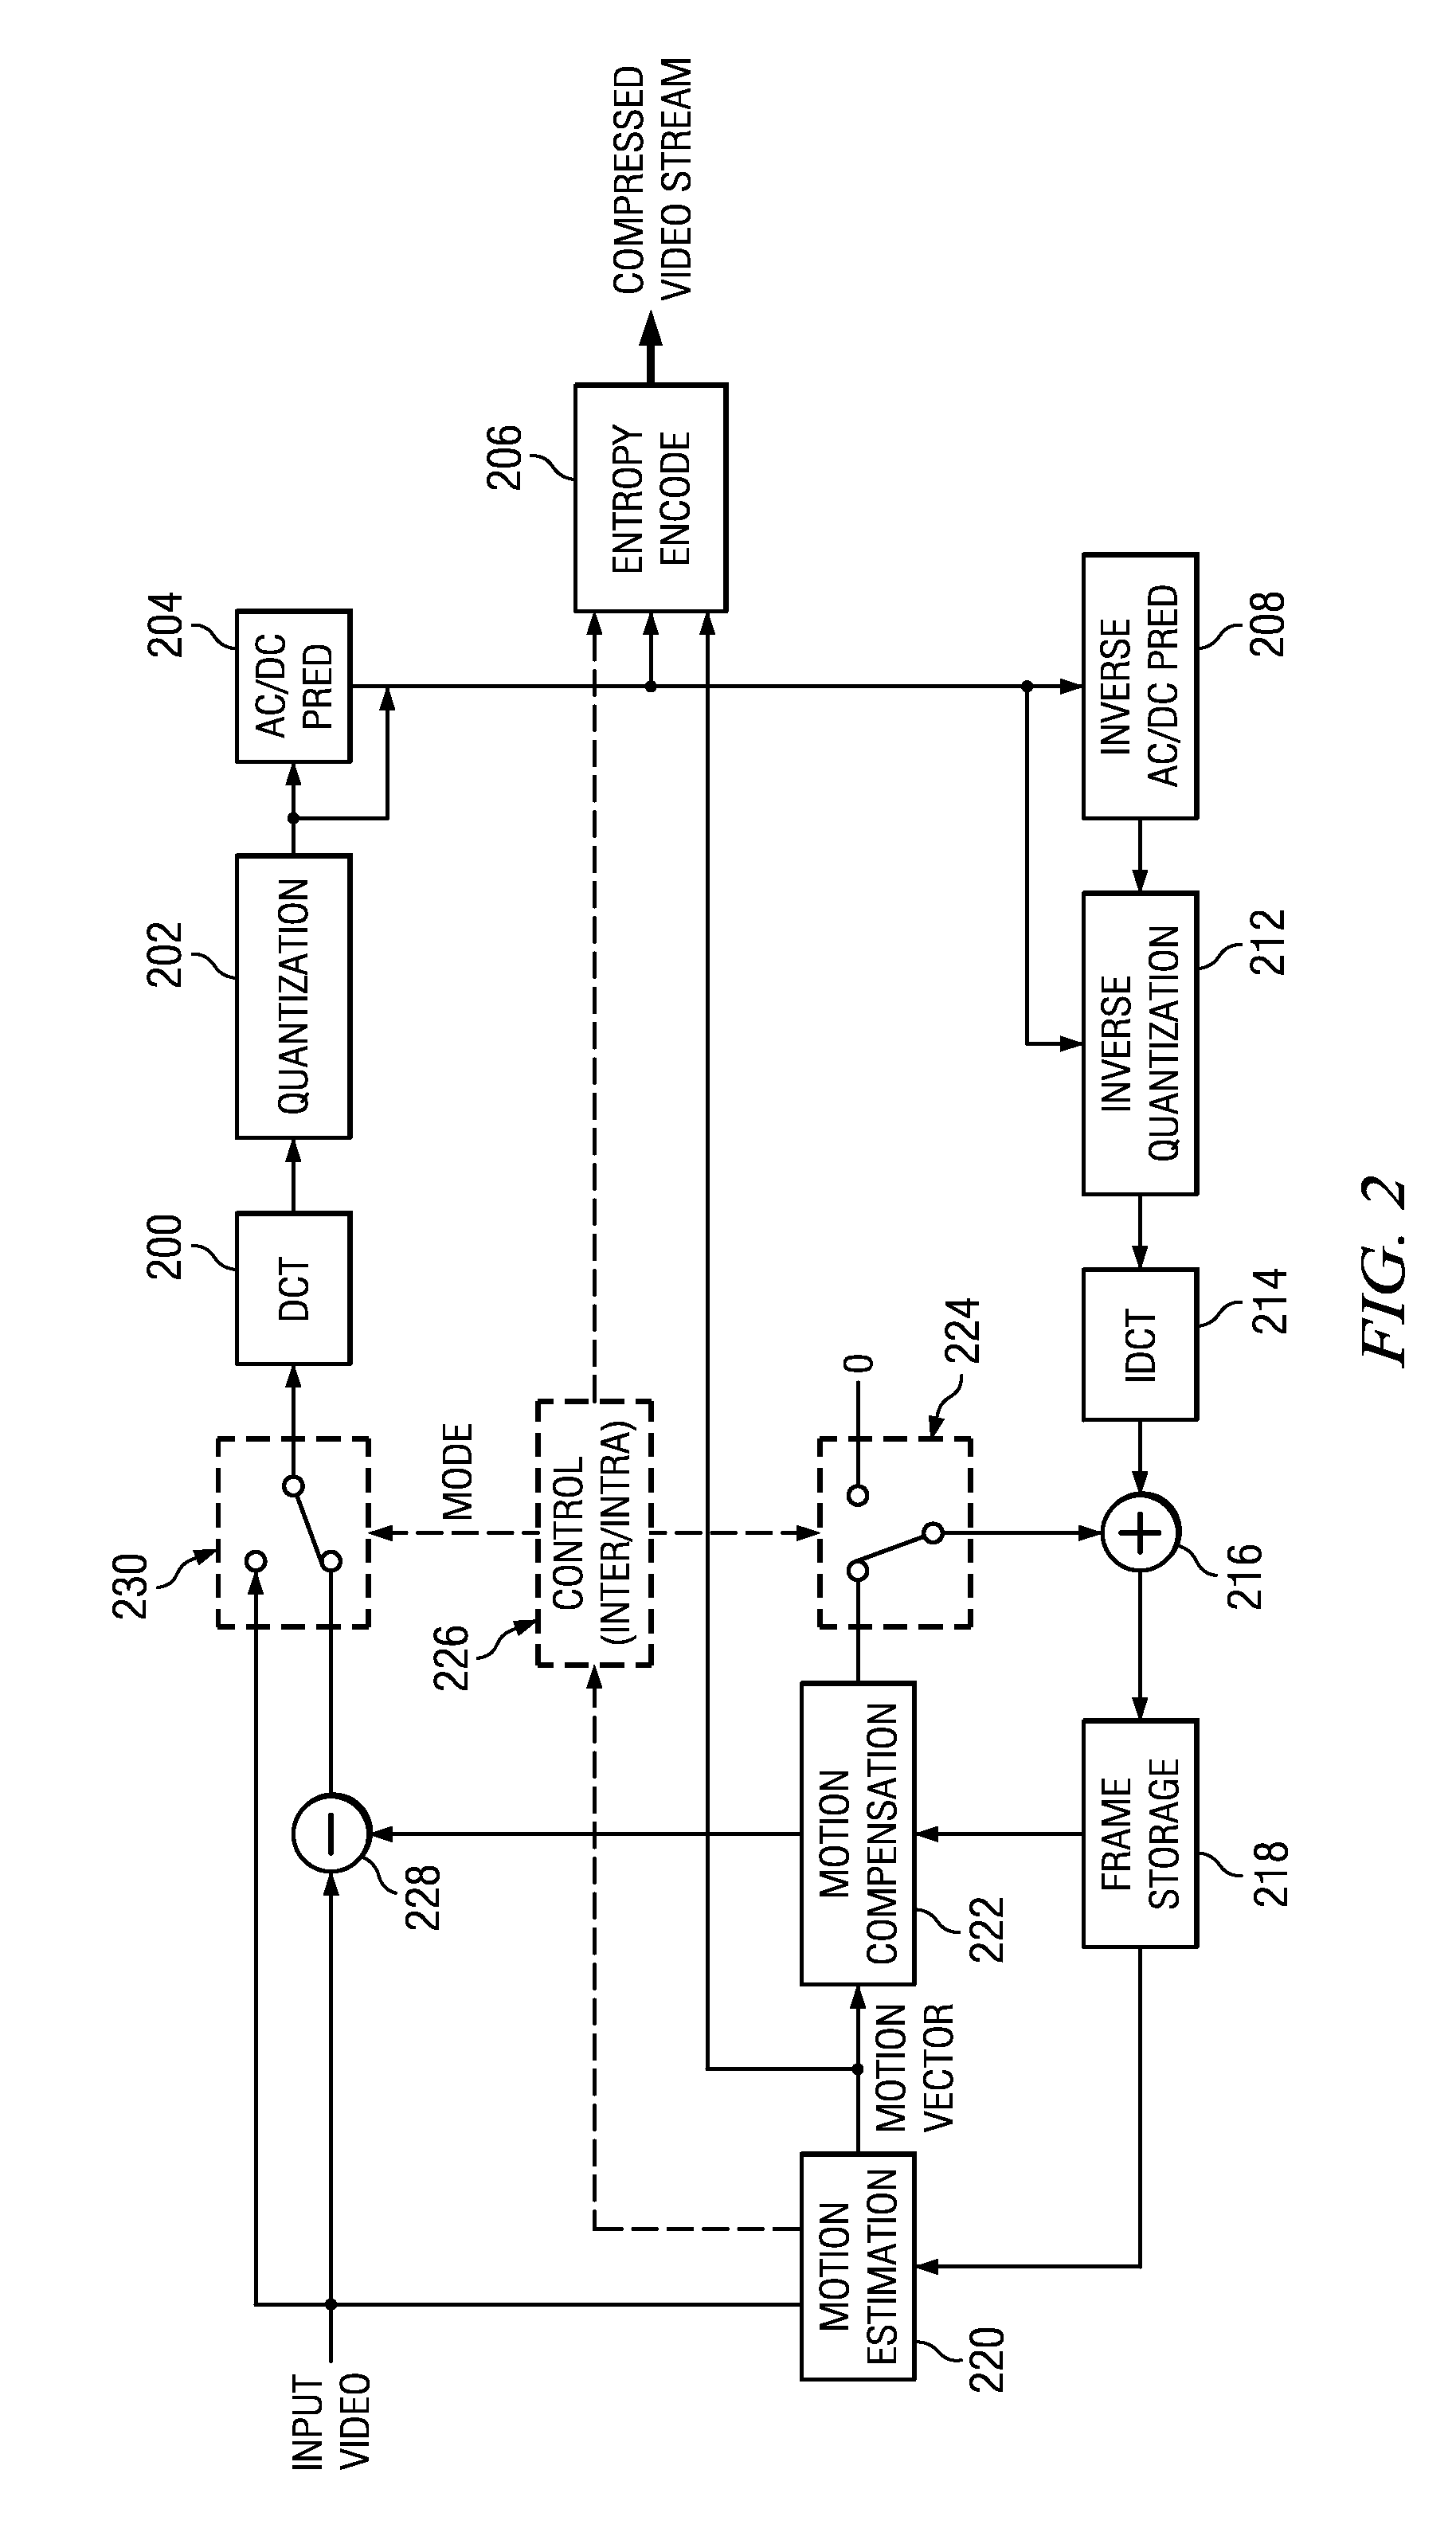 Adaptive Coding Structure and Adaptive FCode Determination in Video Coding